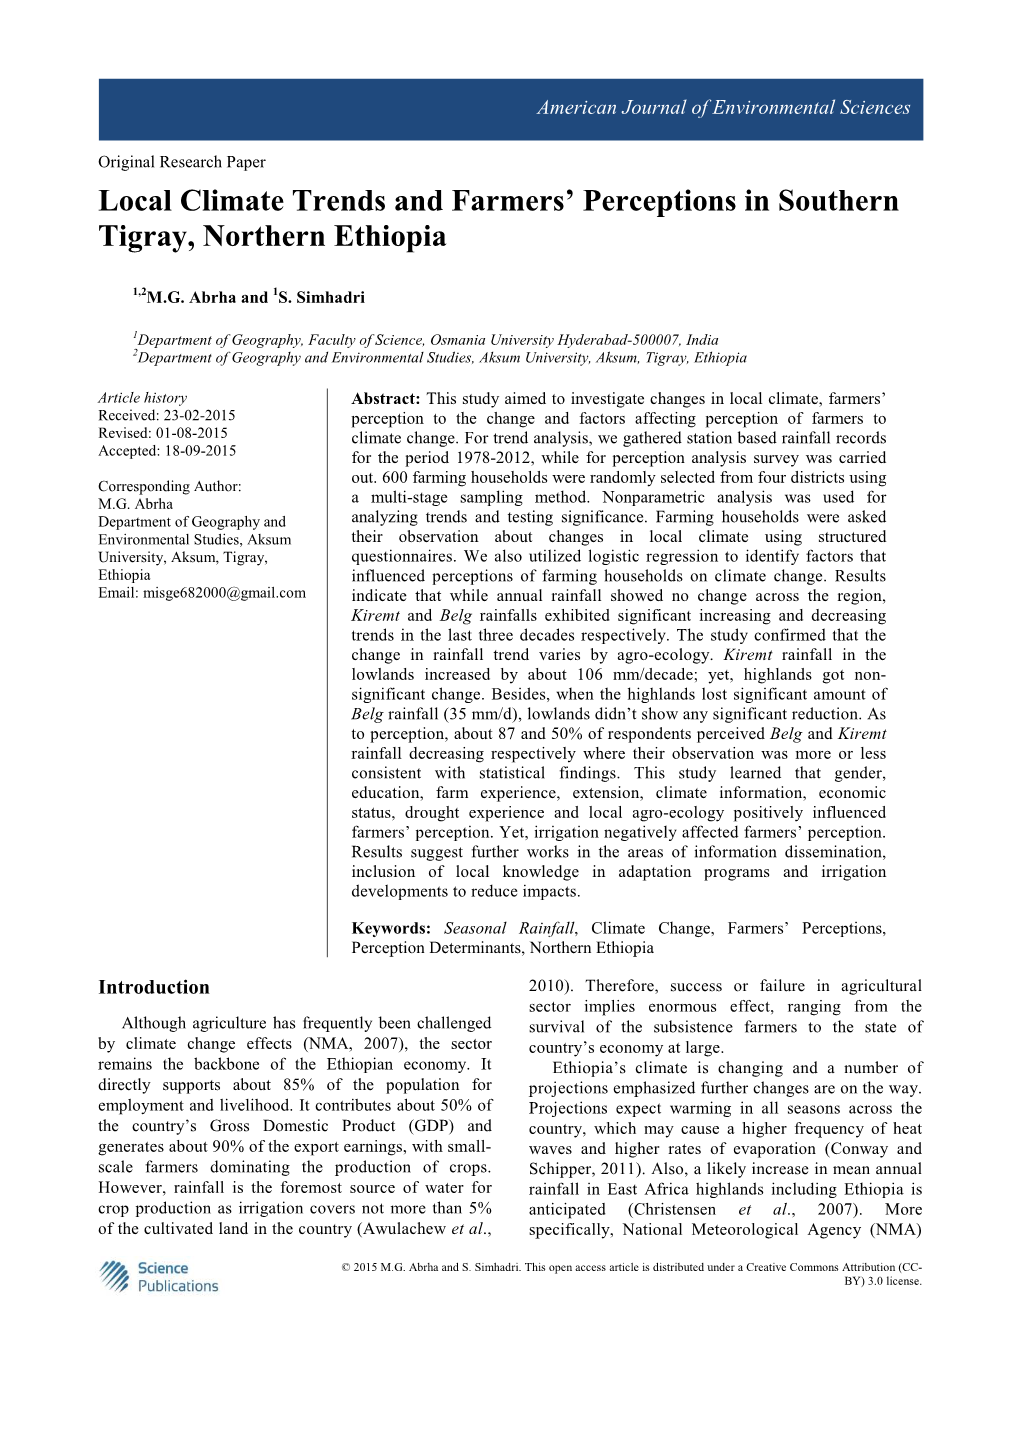 Local Climate Trends and Farmers' Perceptions in Southern Tigray